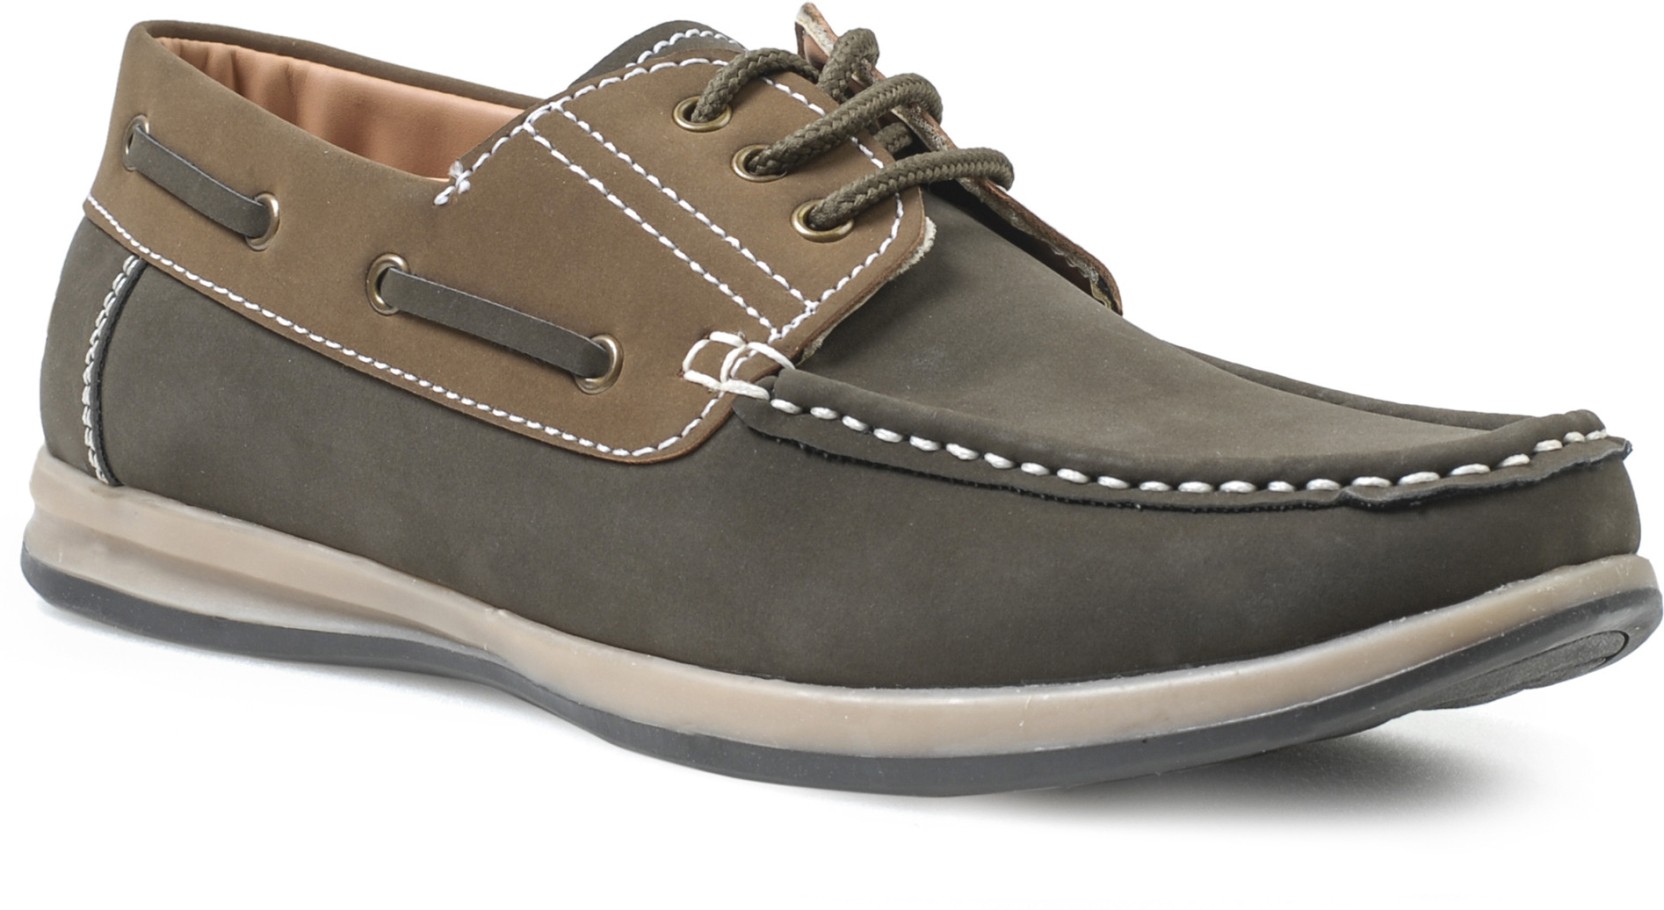 Action DS-22 Boat Shoes - Buy DS-22-OLIVE Color Action DS-22 Boat Shoes ...